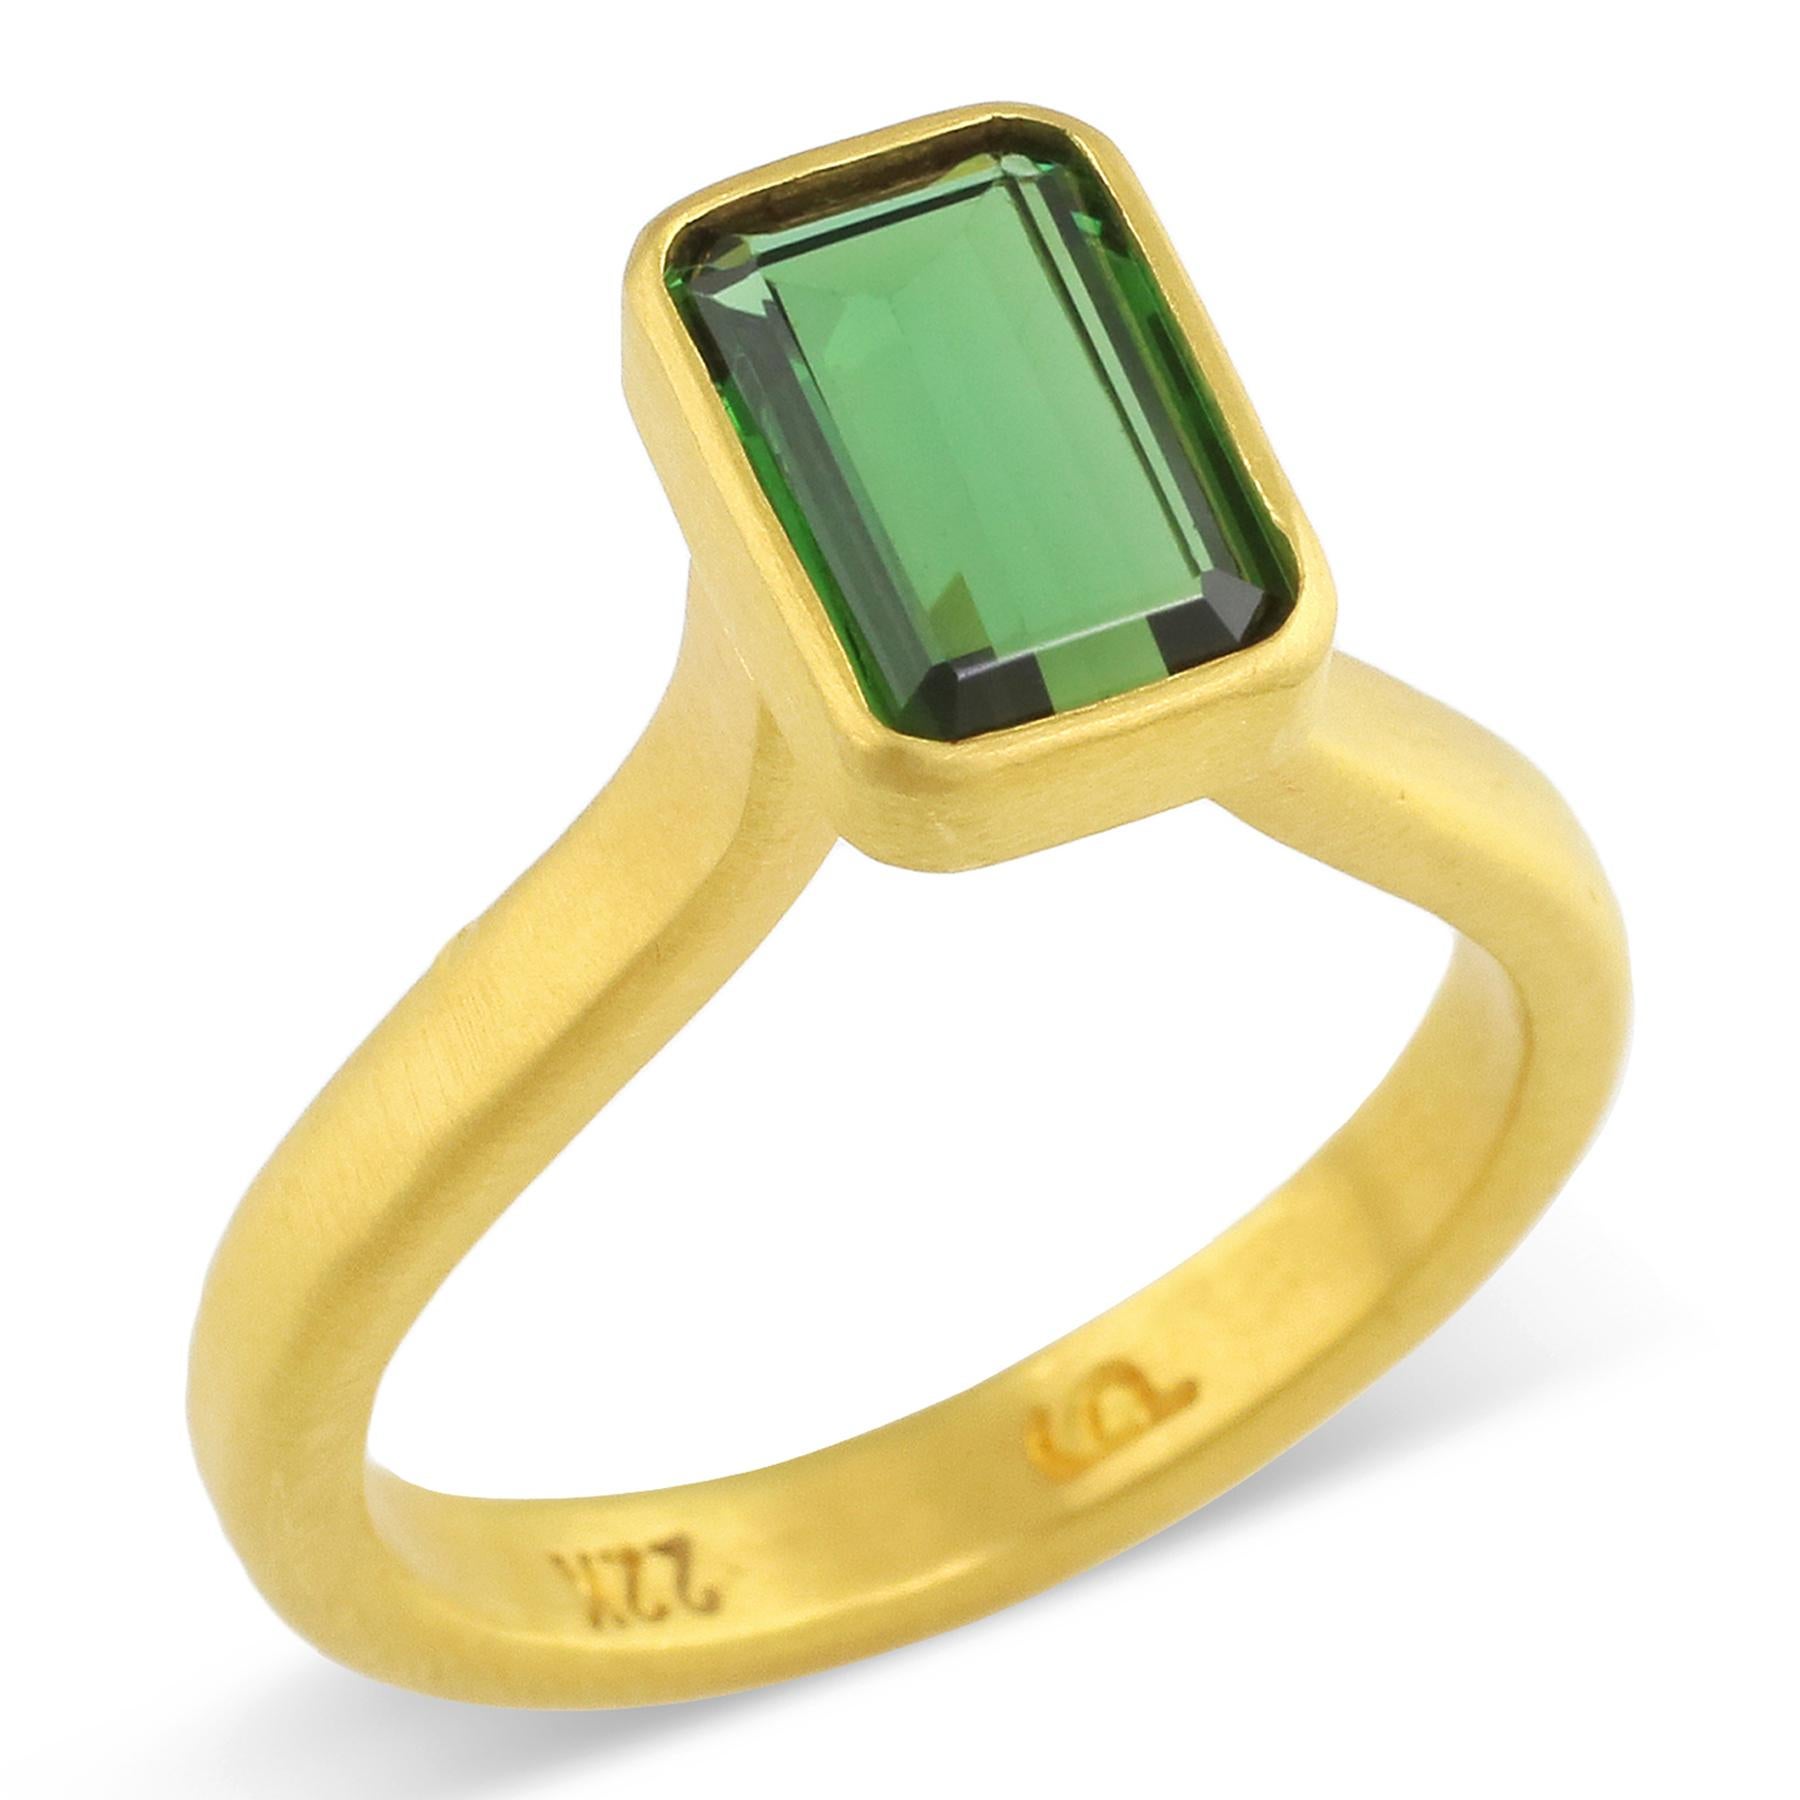 Artisan PHILIPPE SPENCER 1.7 Ct. Extra-Fine Tourmaline Statement Ring in 22K Gold For Sale